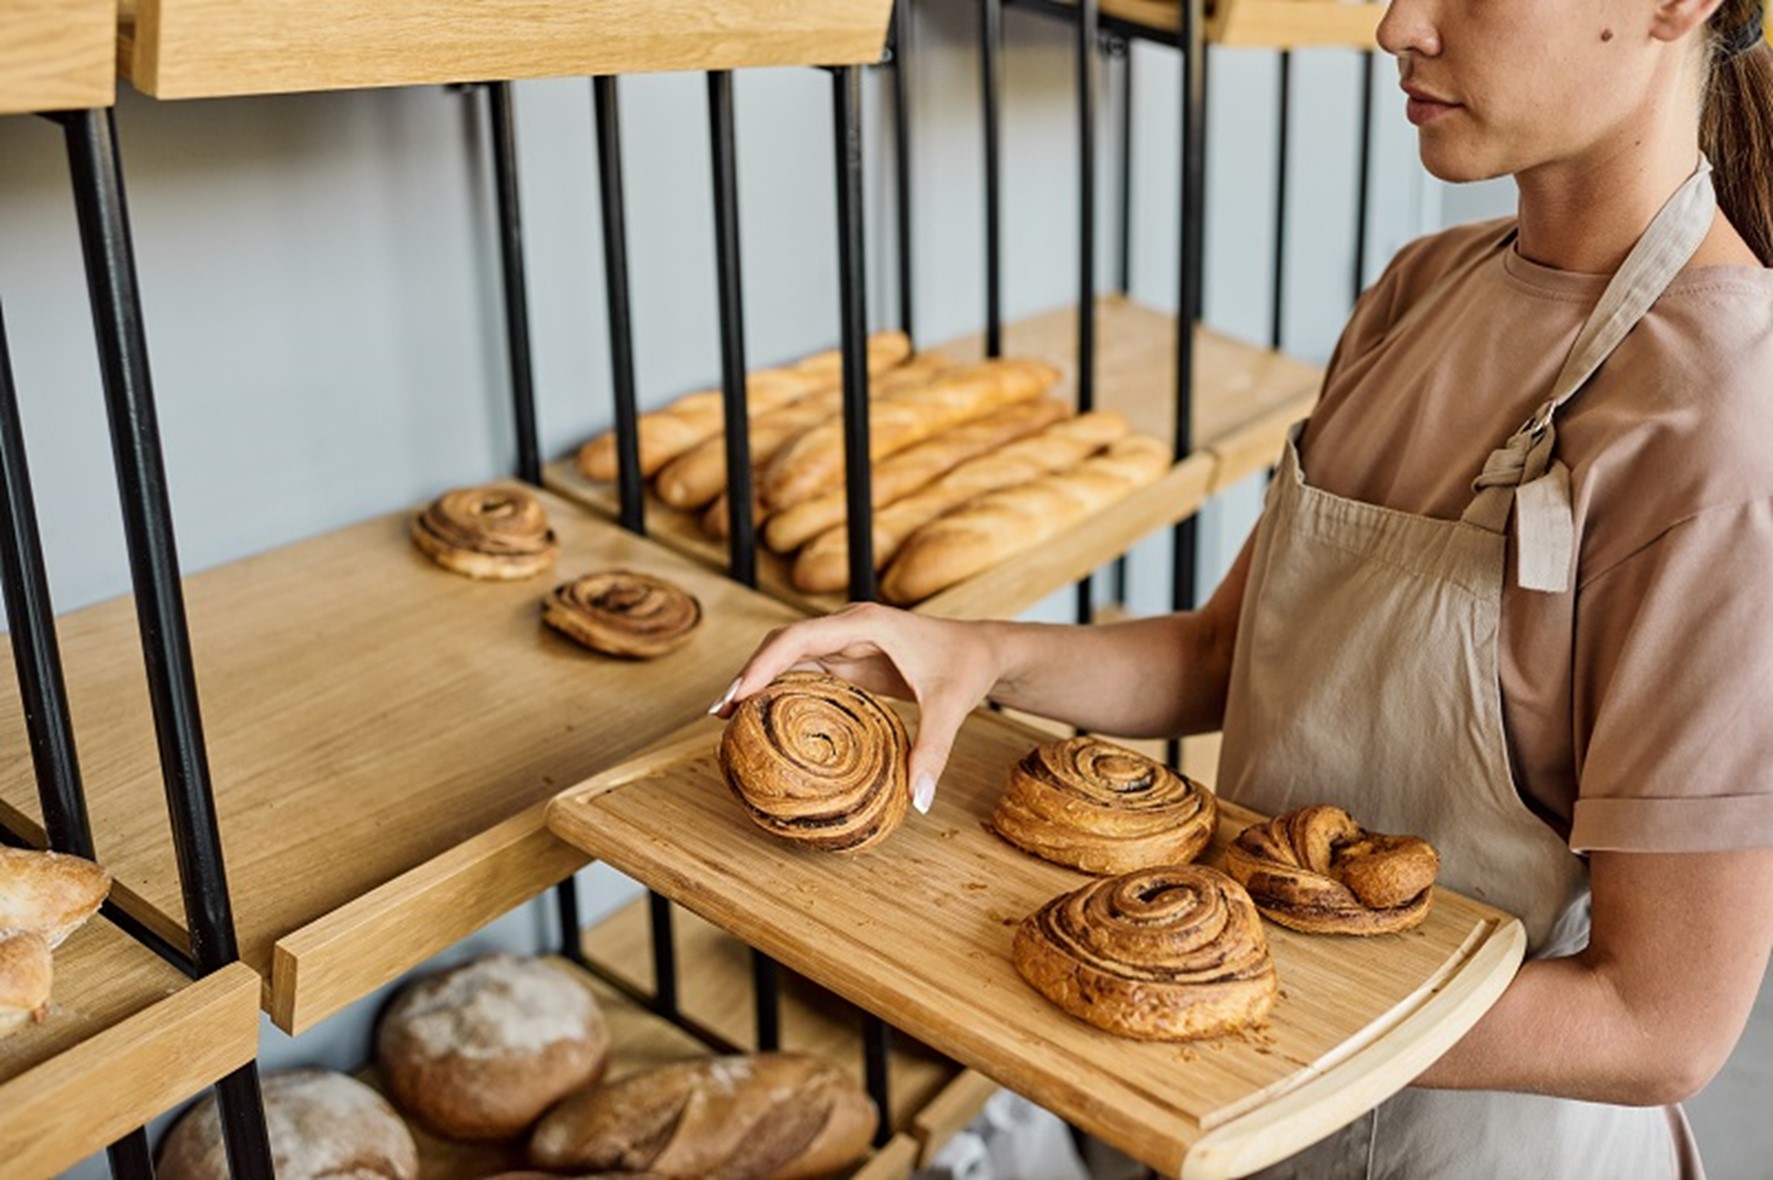 The best bakery ovens of 2022